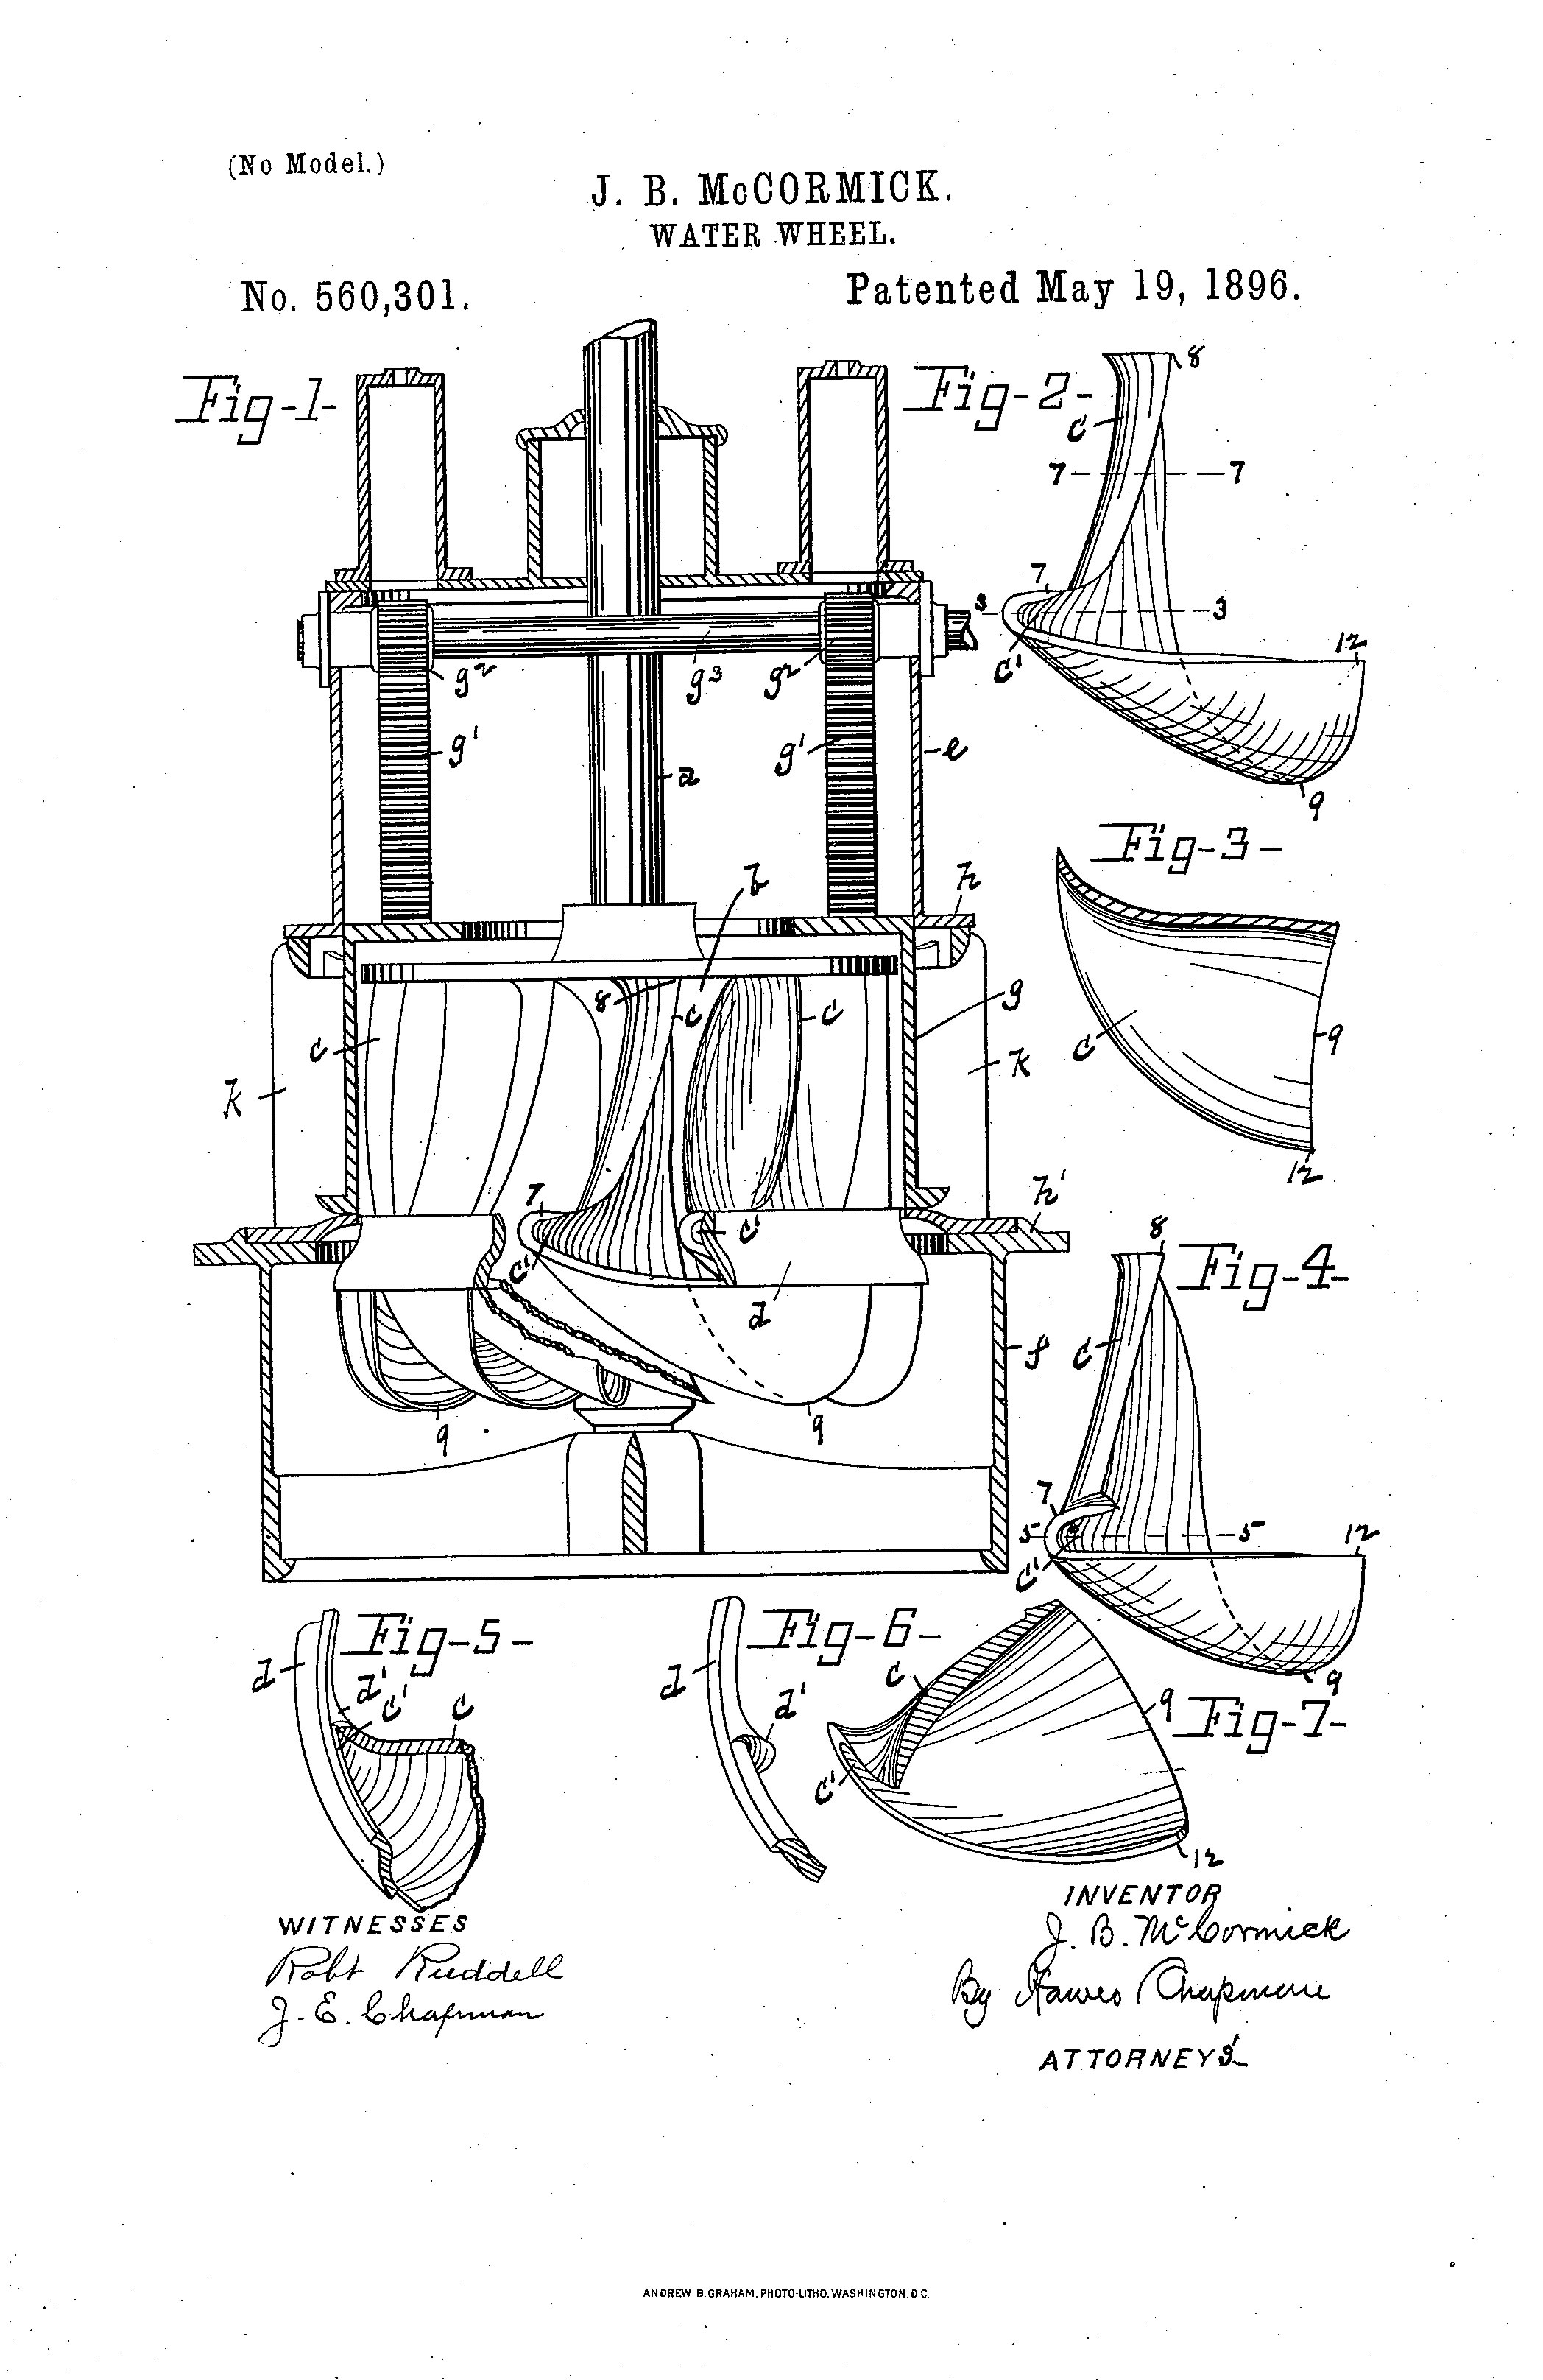 John B. McCormick's patent for the mixed flow water turbine